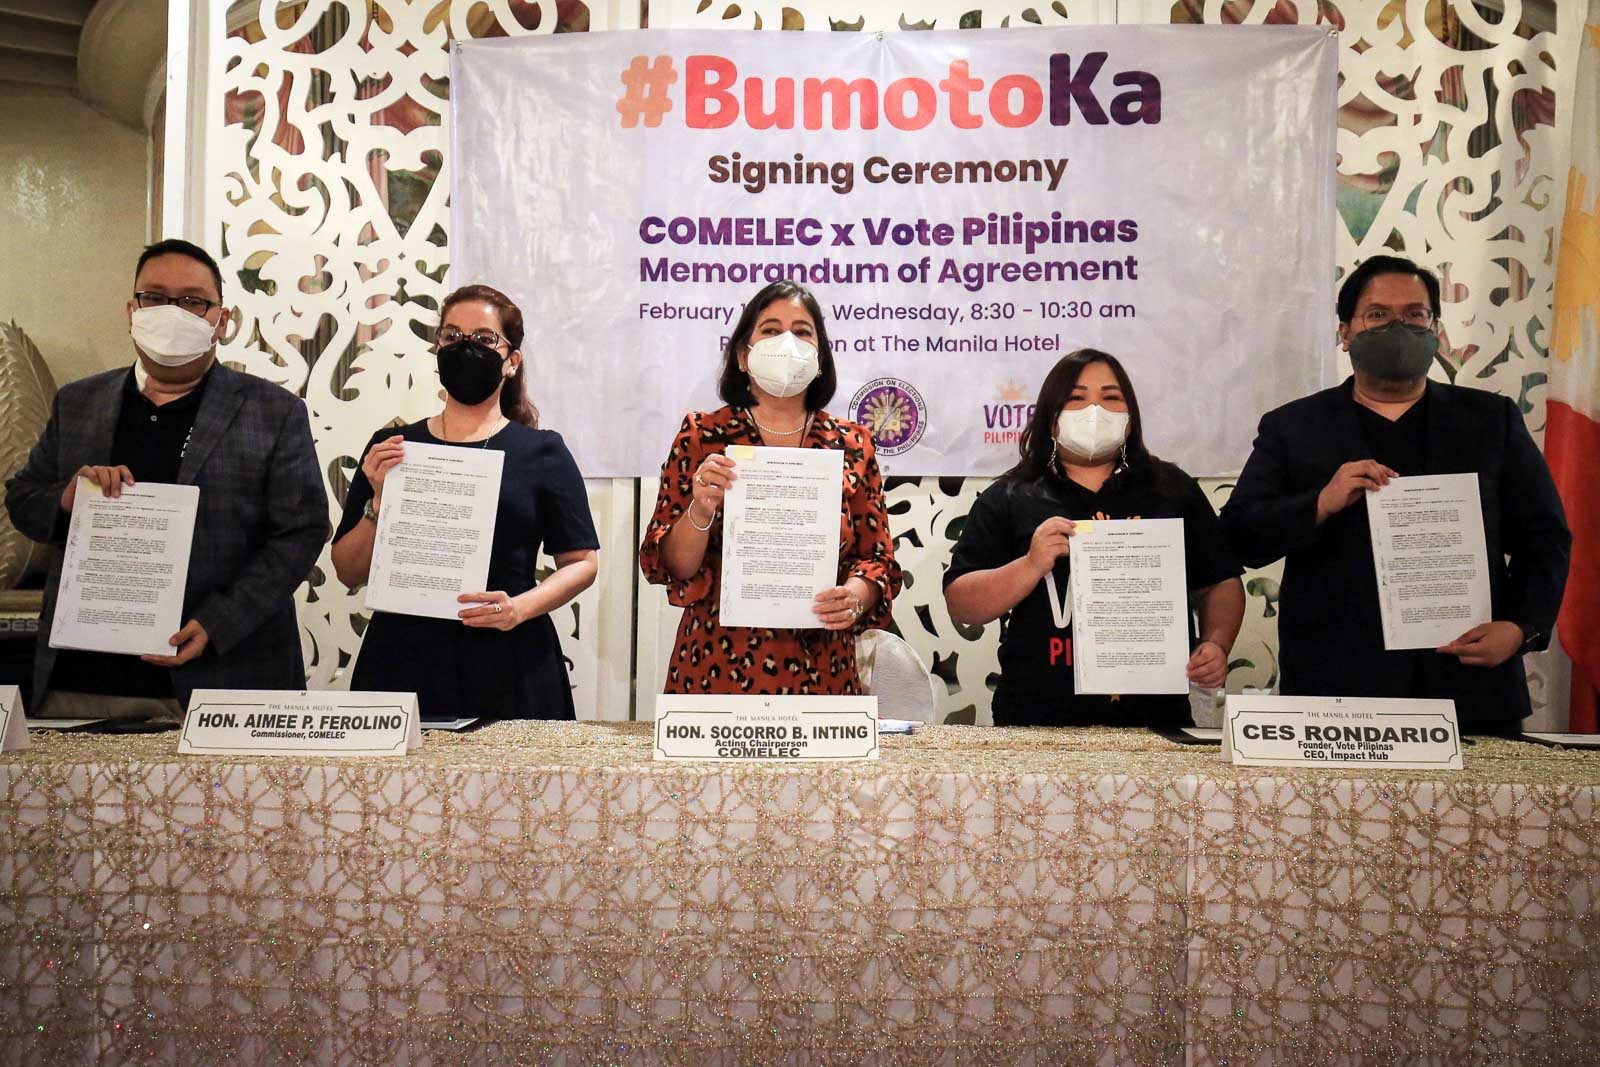 Comelec, non-profit group seek to raise voter turnout in 2022